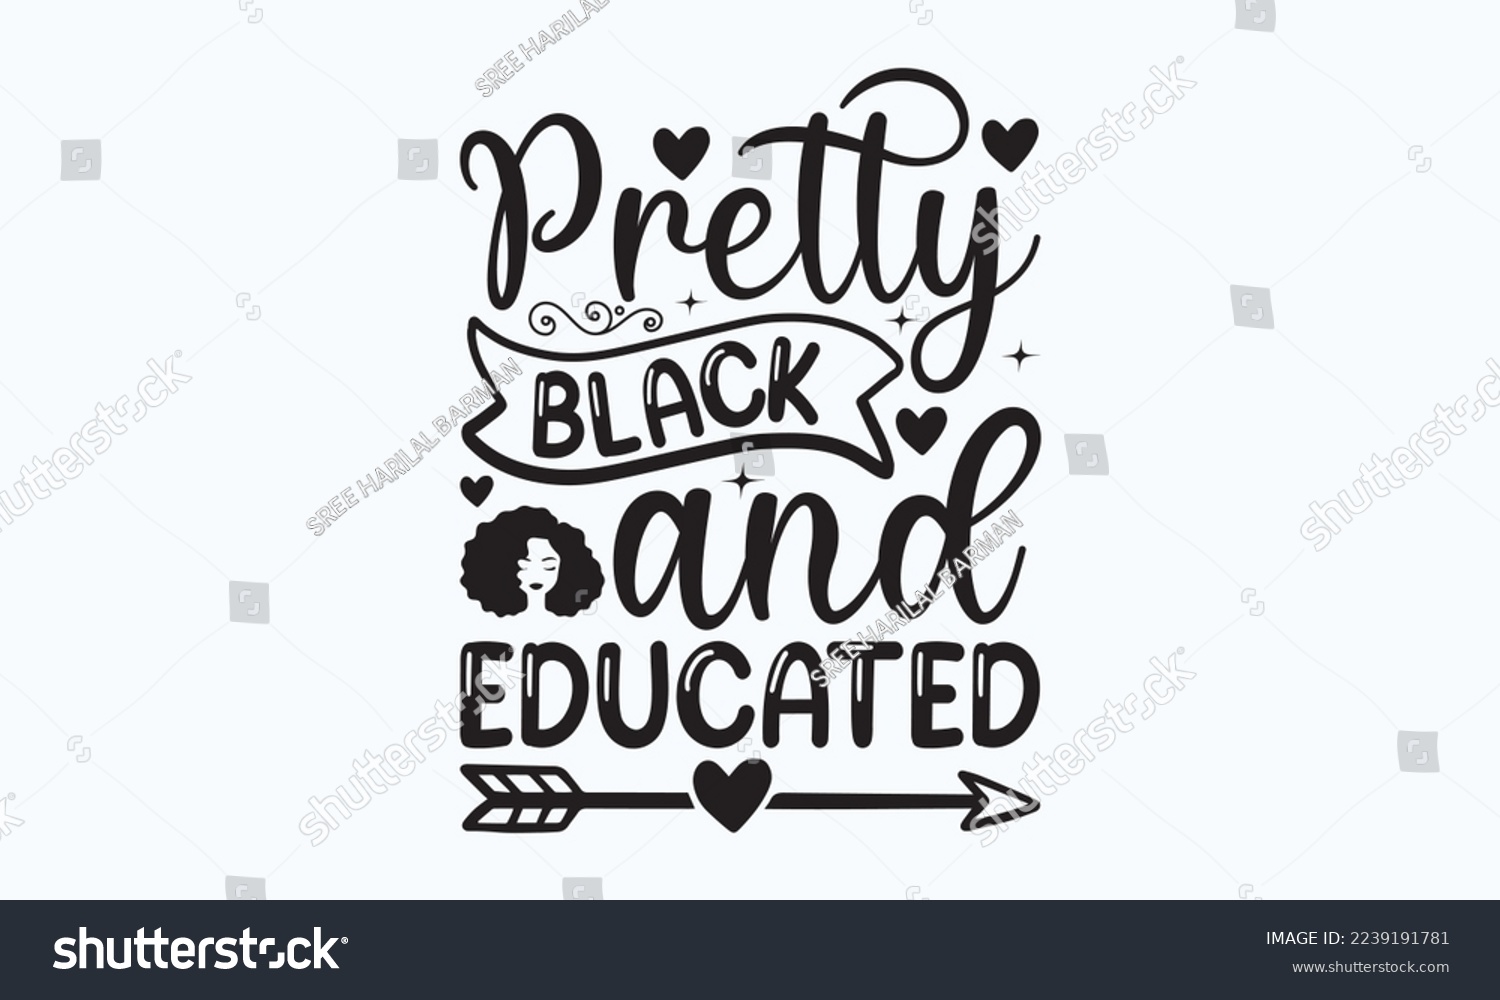 SVG of Pretty black and educated - T-shirt Design, File Sports SVG Design, Sports typography t-shirt design, For stickers, Templet, mugs, etc. for Cutting, cards, and flyers. svg